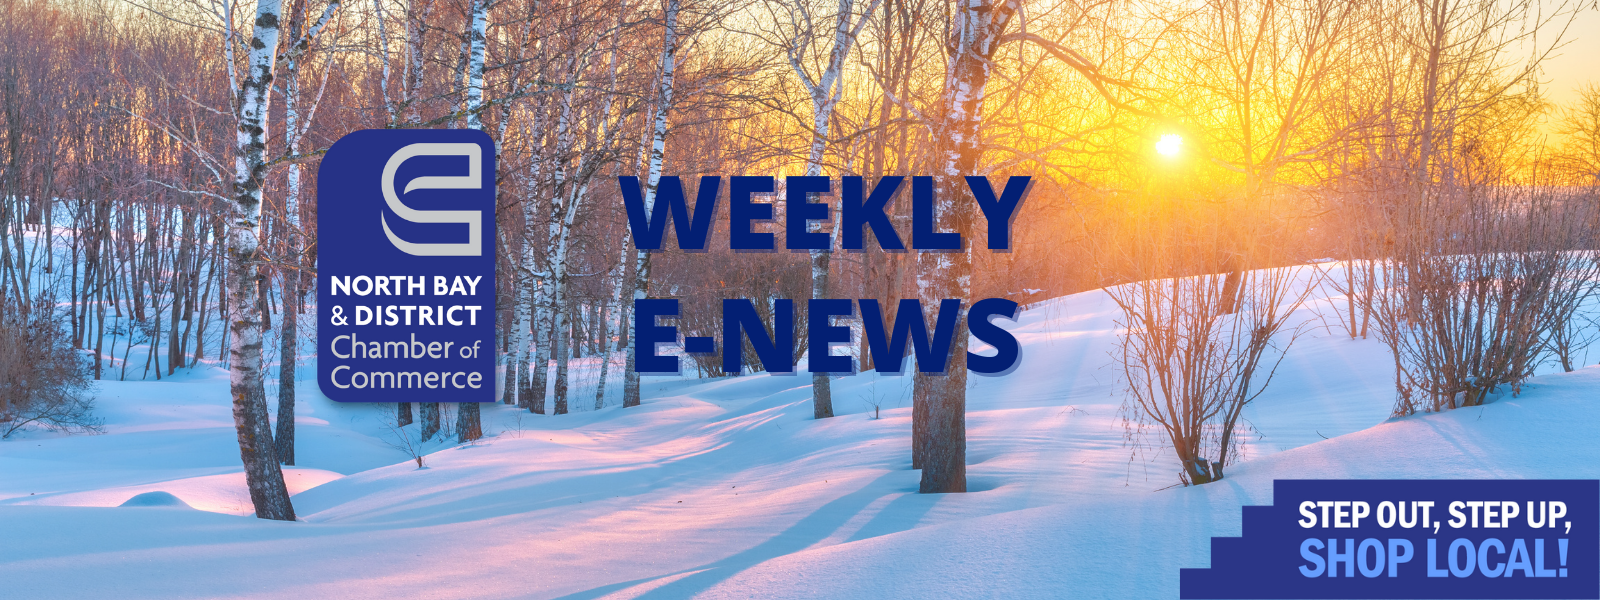 Weekly E-News - North Bay and District Chamber of Commerce